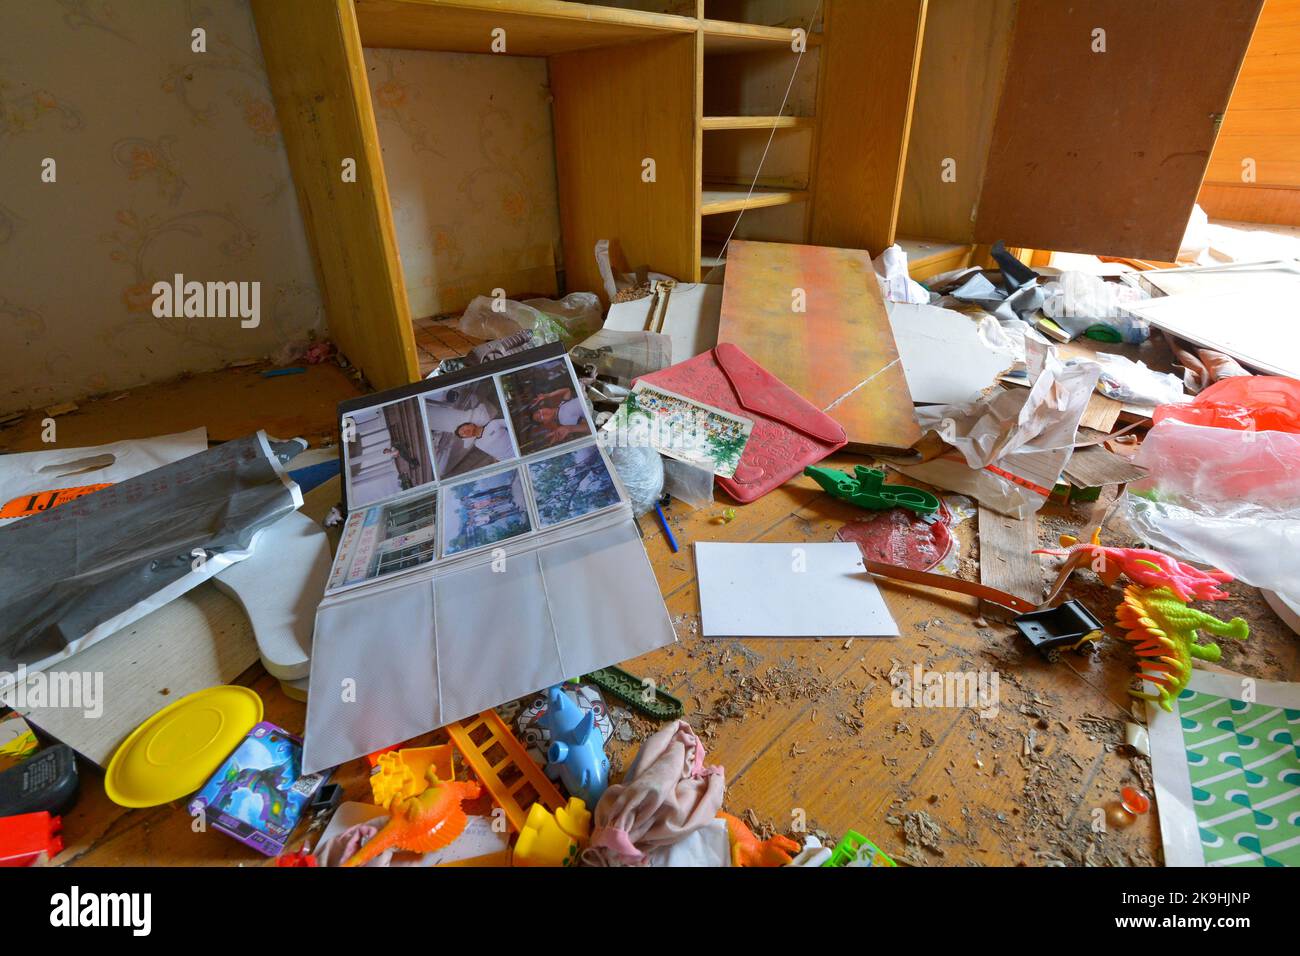 Chinese home abandoned due to relocation but then pilfered and ransacked by thieves looking for valuables. Stock Photo